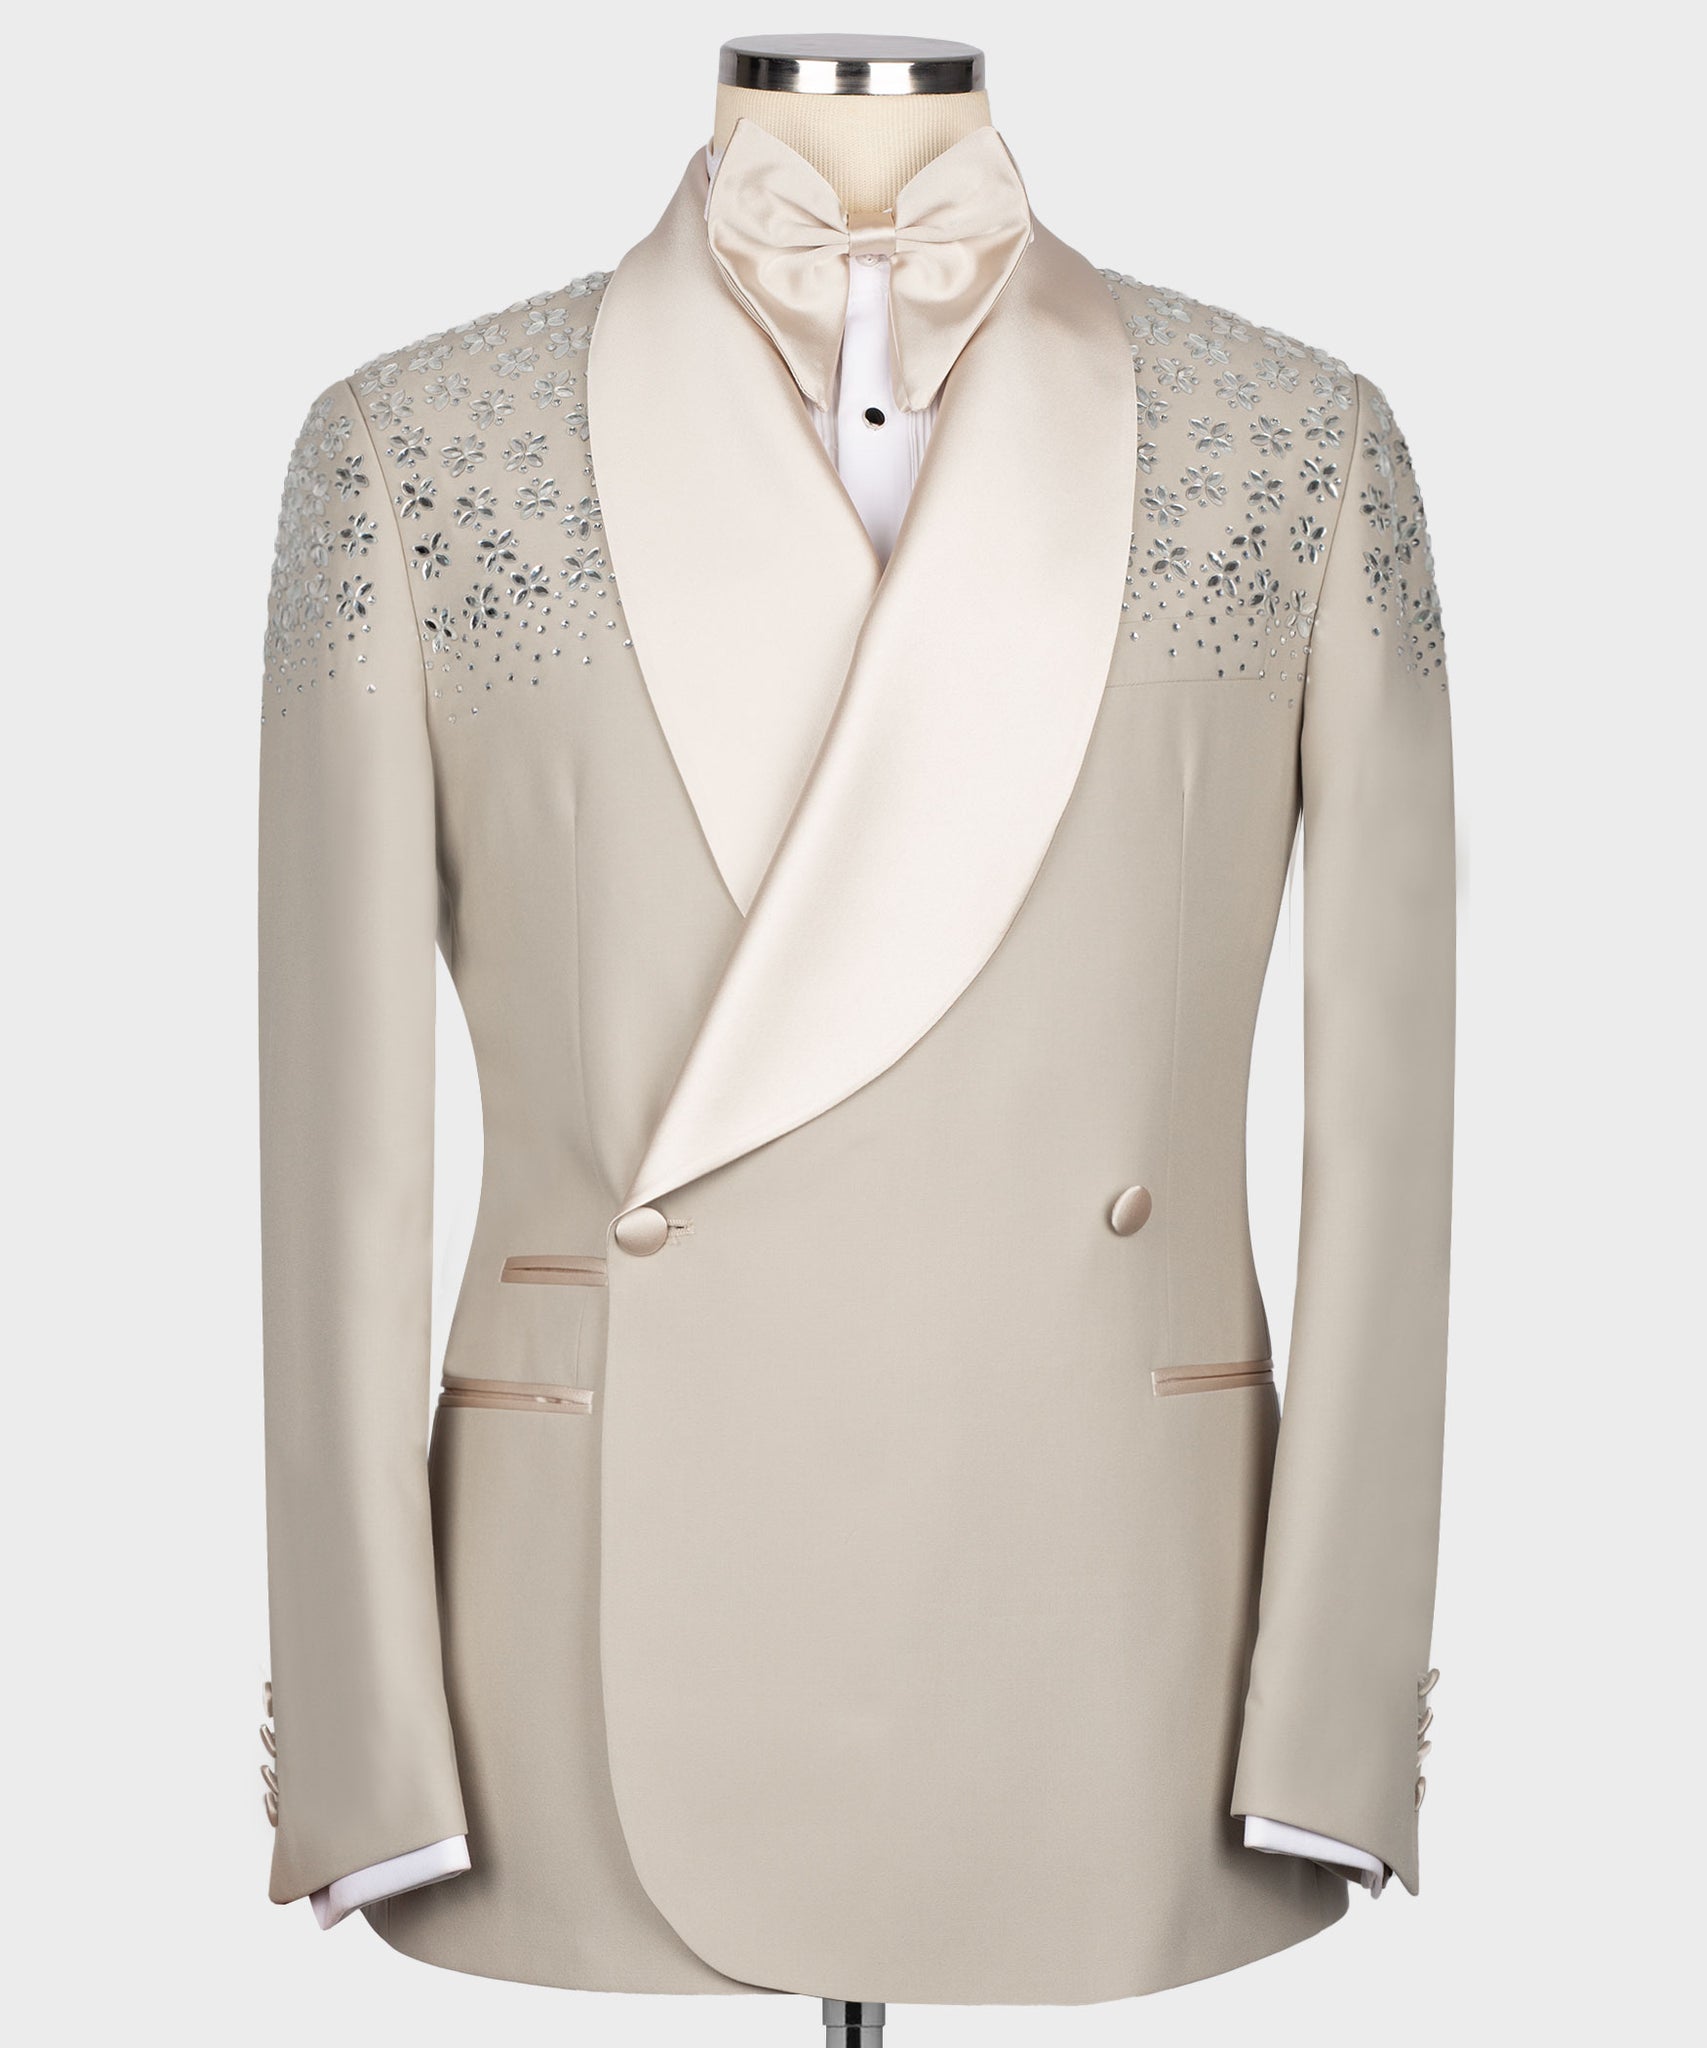 SPECIAL CREAM TUXEDO WITH STONE EMBROIDERY